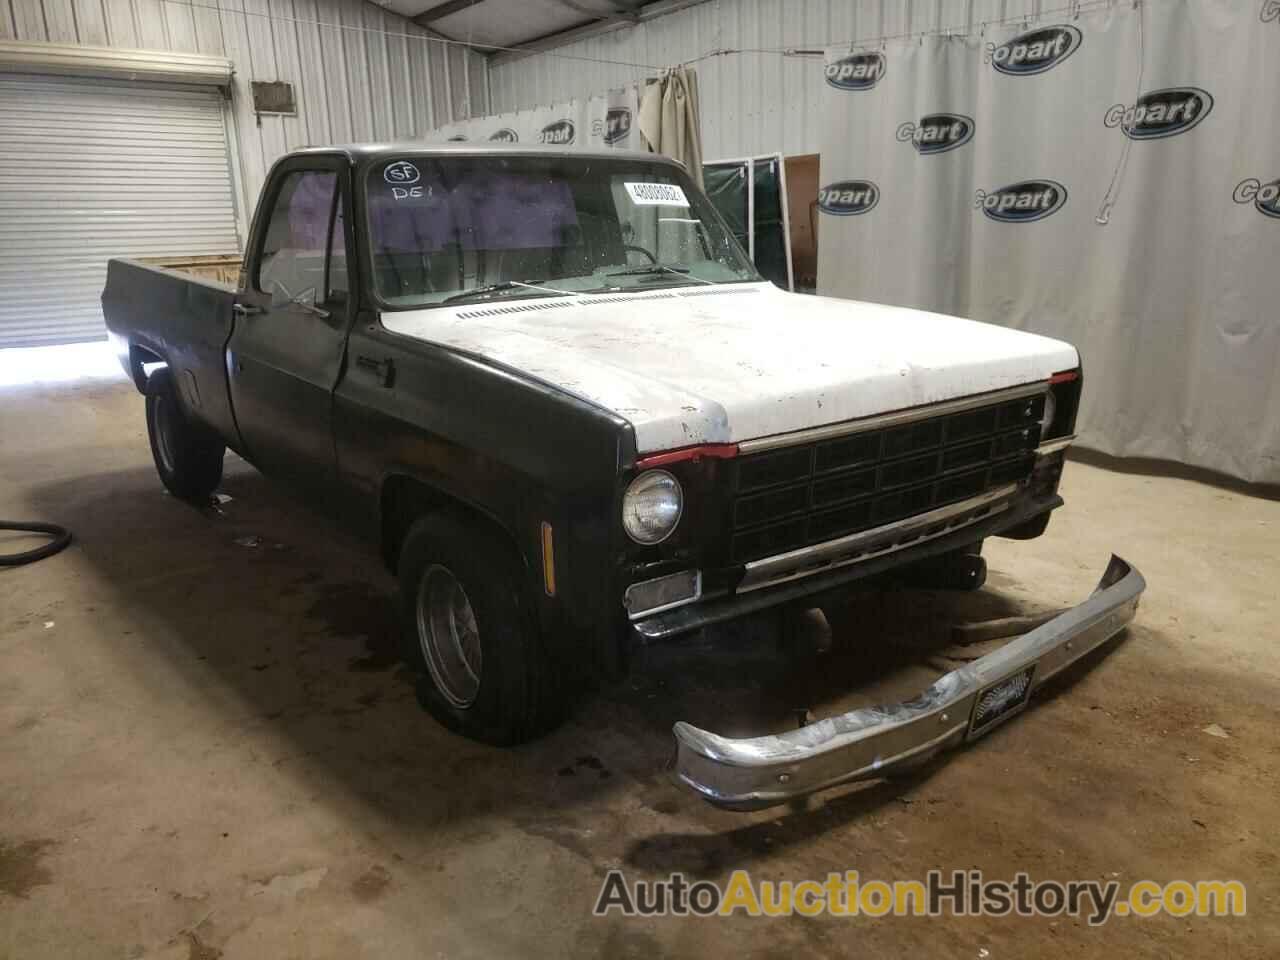 1978 GMC ALL OTHER, TCL448F707299